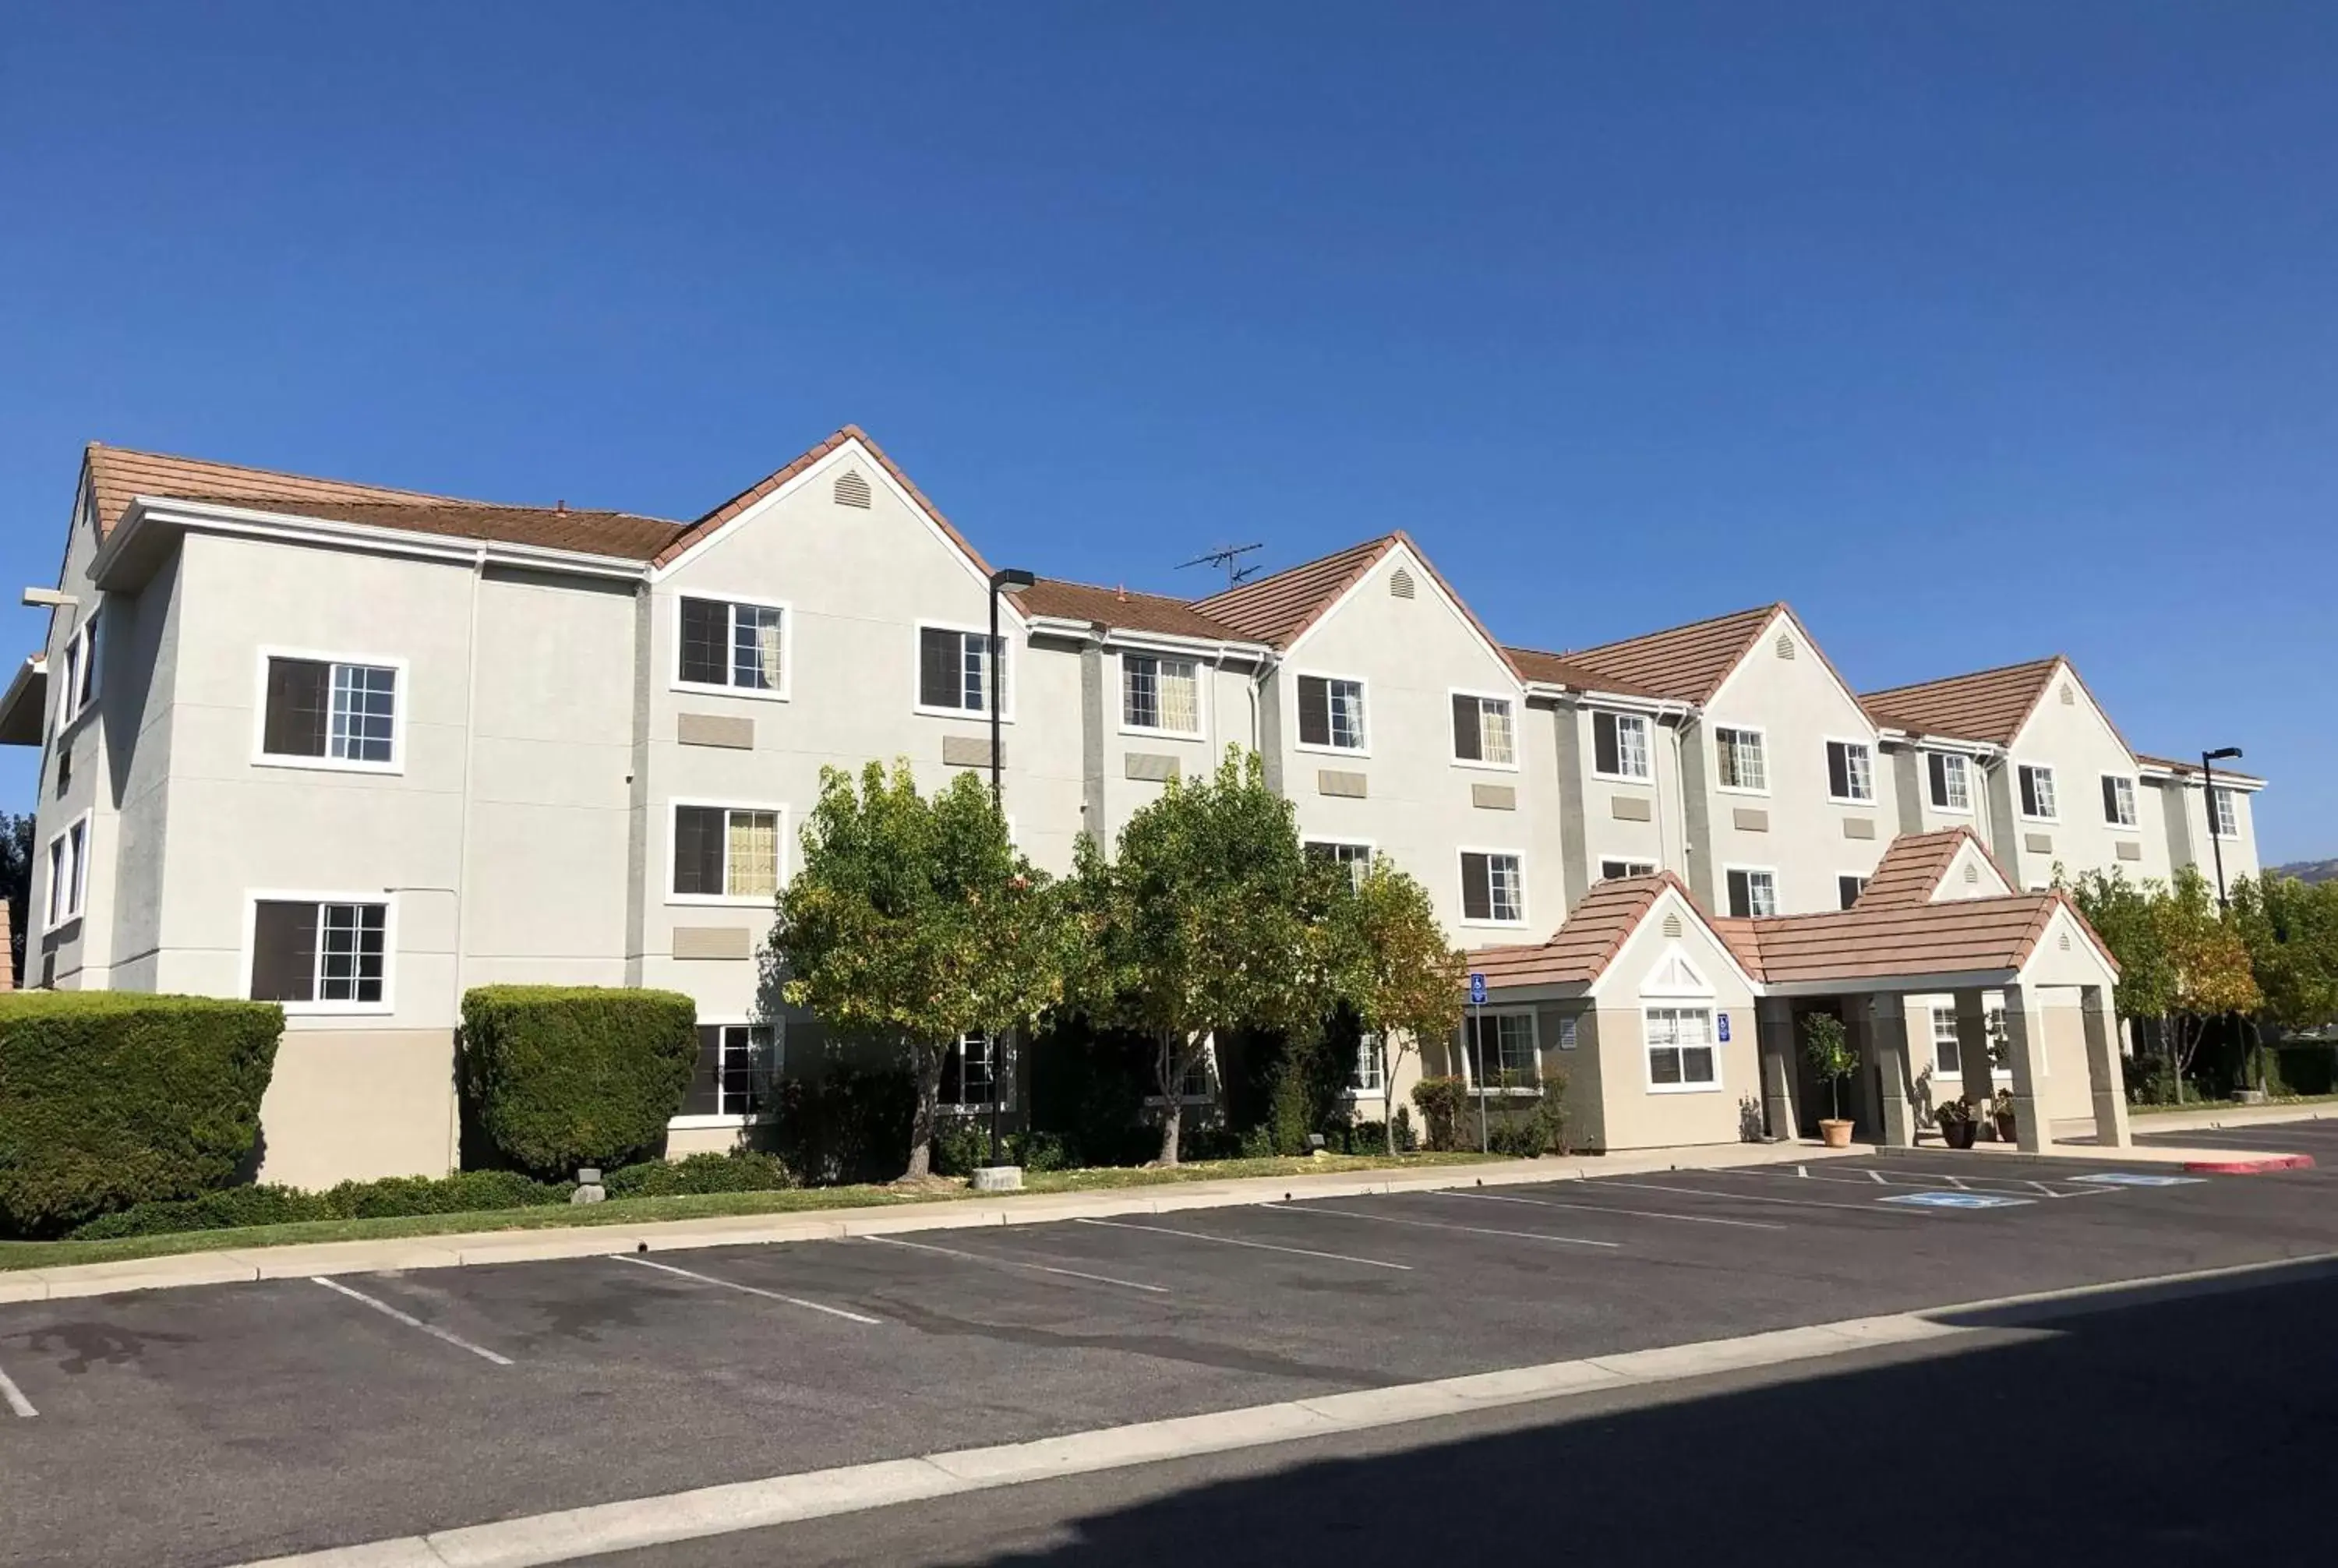 Property Building in Microtel Inn & Suites, Morgan Hill